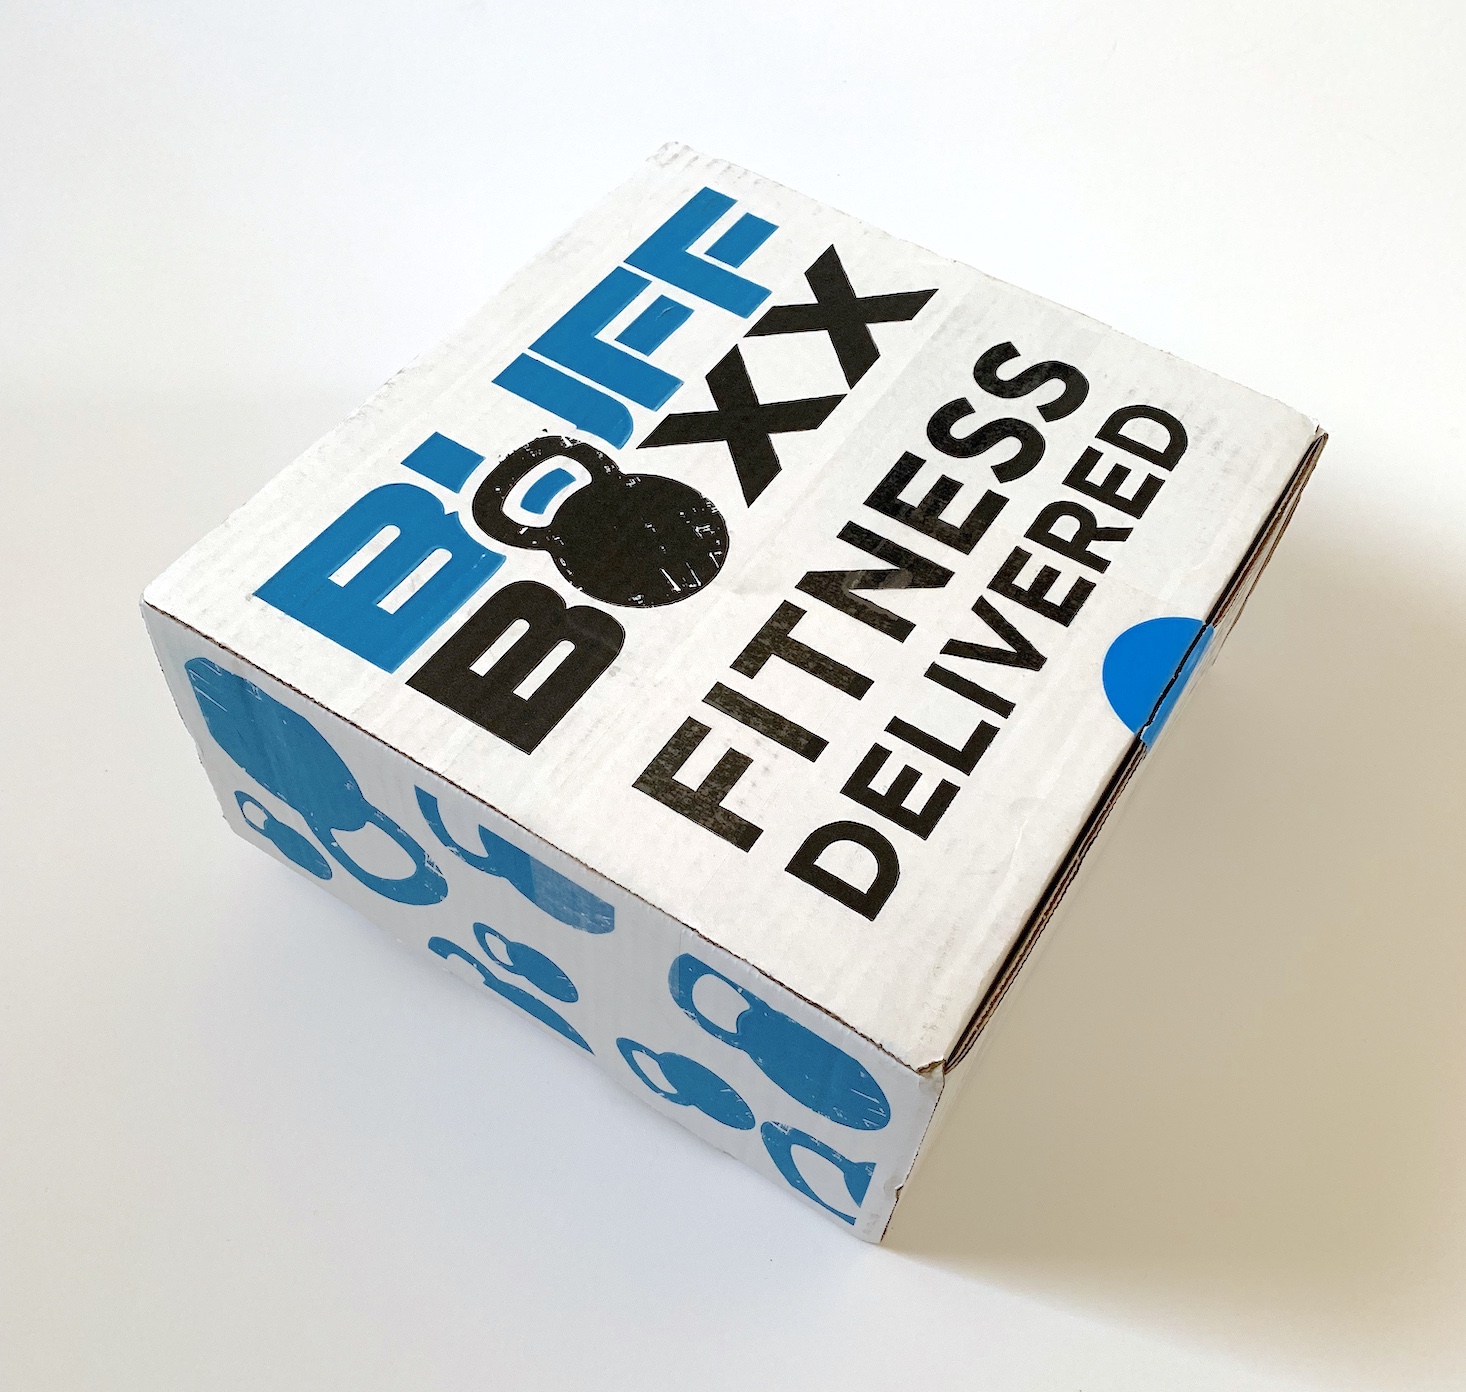 BuffBoxx Fitness Subscription Review + Coupon – December 2018